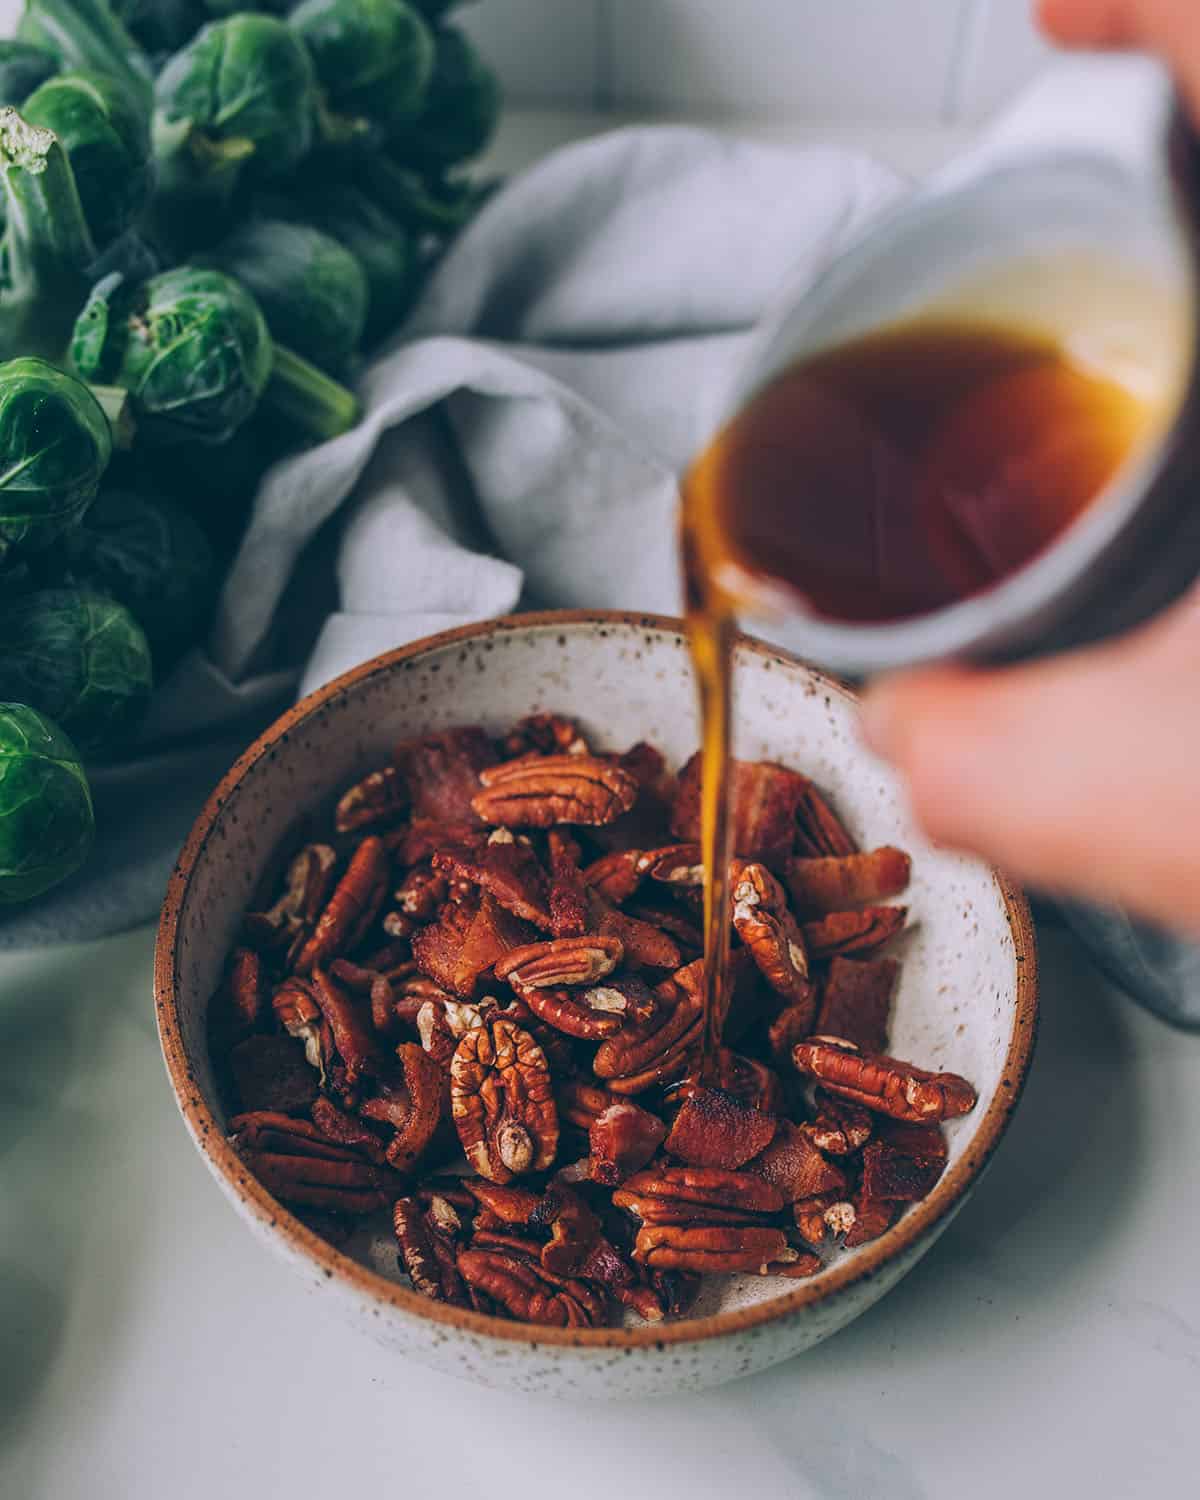 A bowl of chopped bacon and pecan halves with a bowl of maple syrup being drizzled onto it with a stalk of Brussels sprouts in the background.